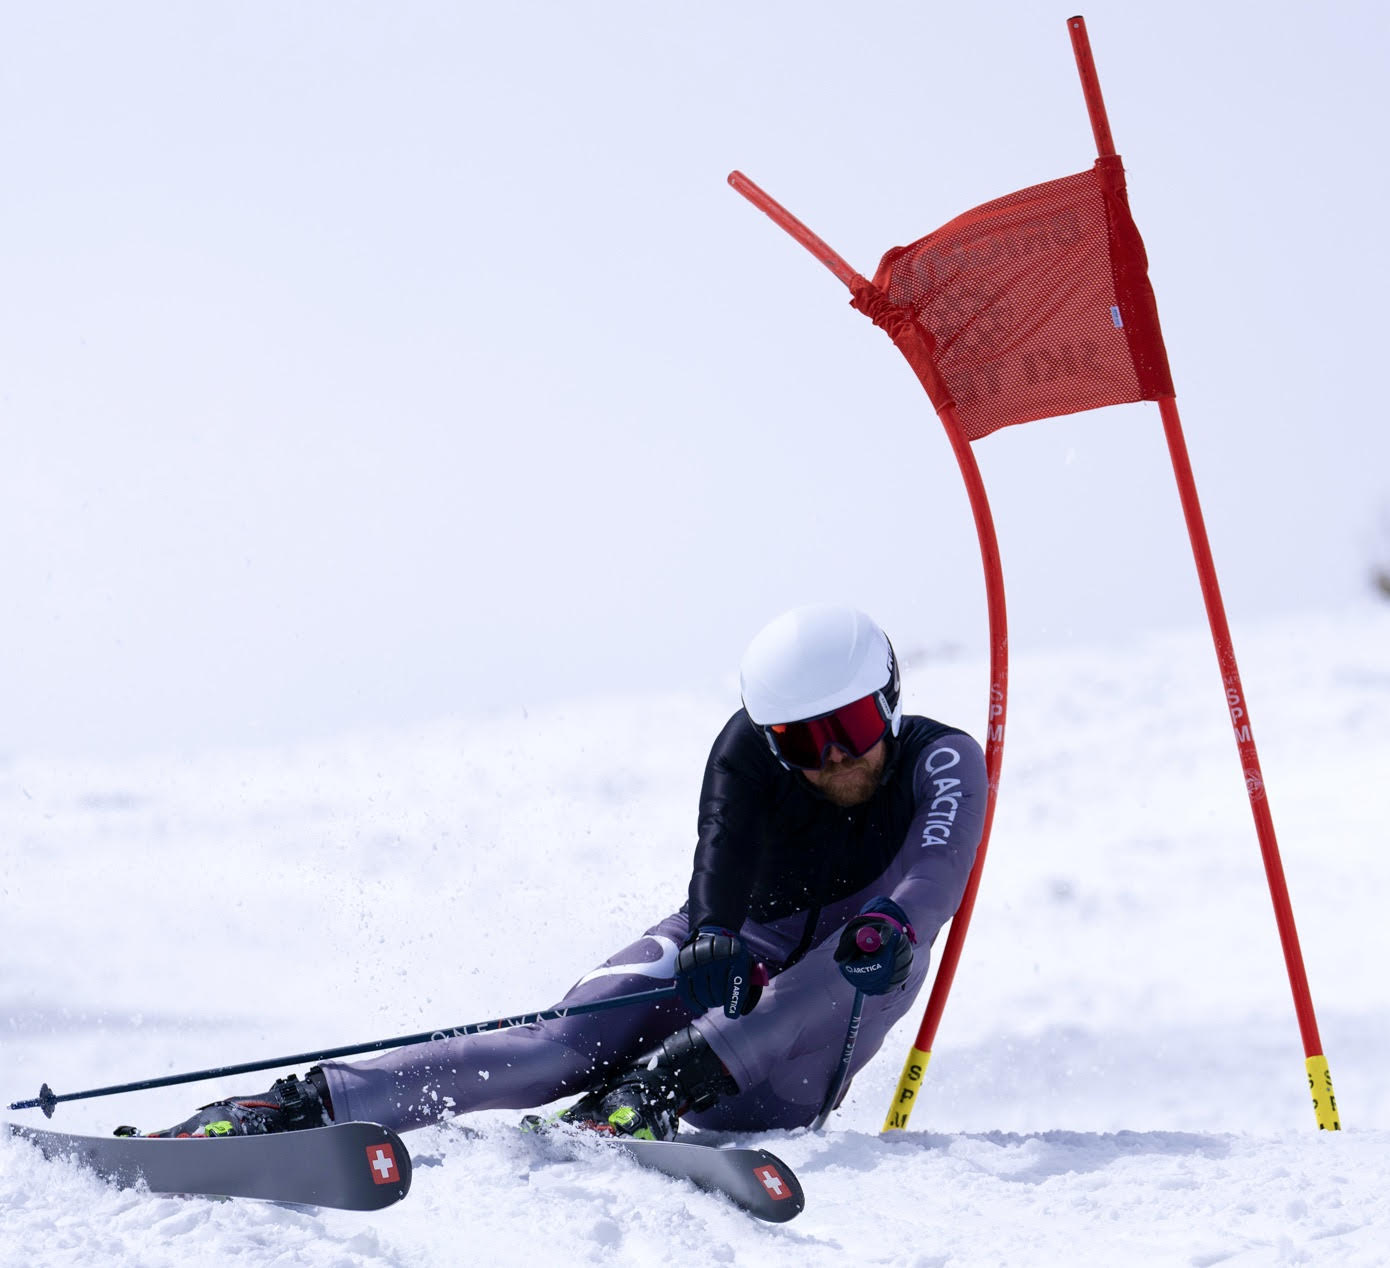 GS ski racer with angles wearing arctica ski racing suit